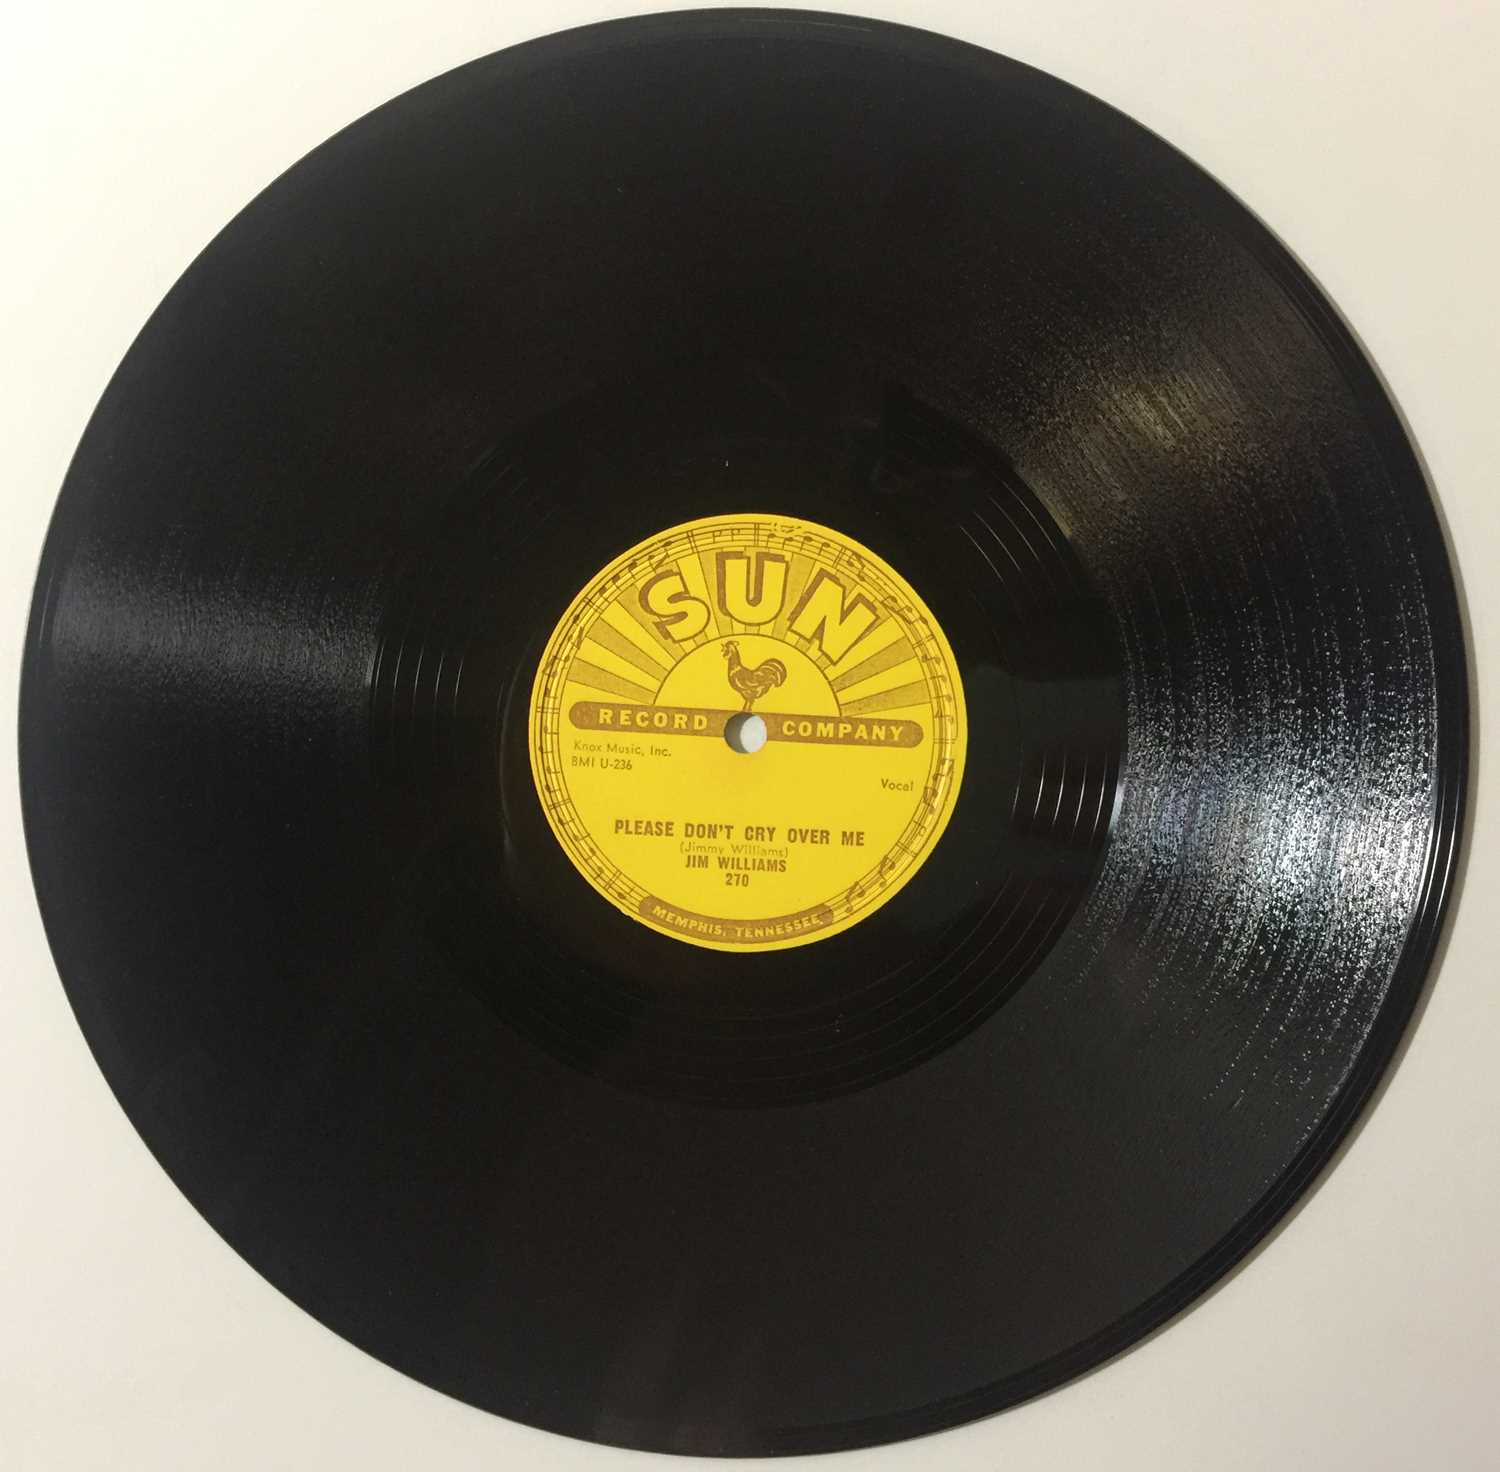 Lot 9 - Jim Williams - Please Don't Cry Over Me 78 (SUN 270)